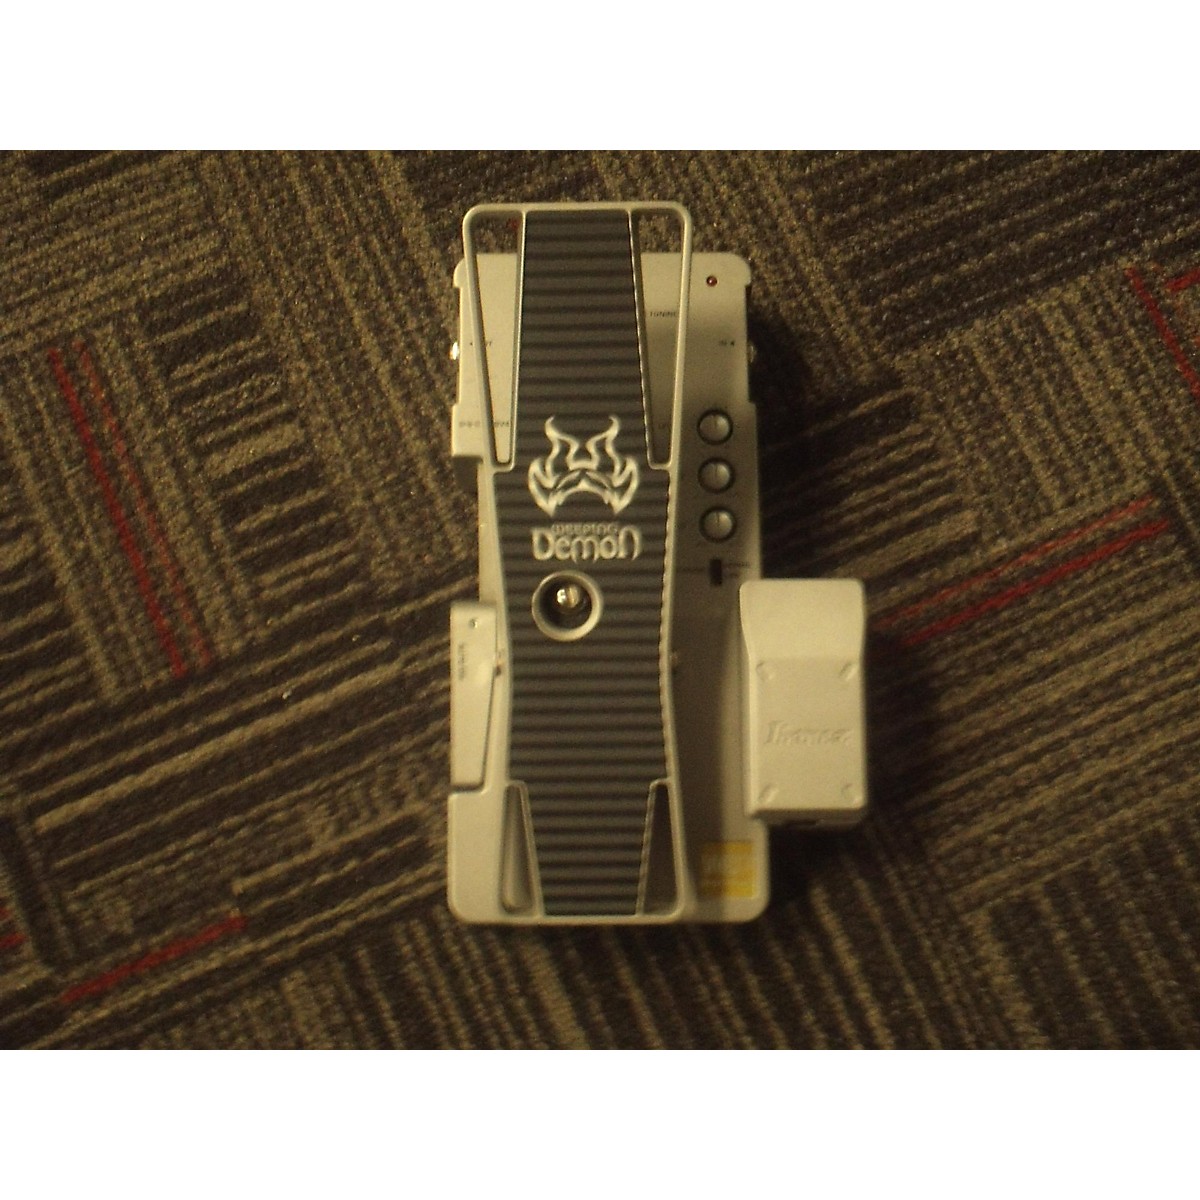 Used Ibanez WD7 Weeping Demon Wah Effect Pedal | Guitar Center